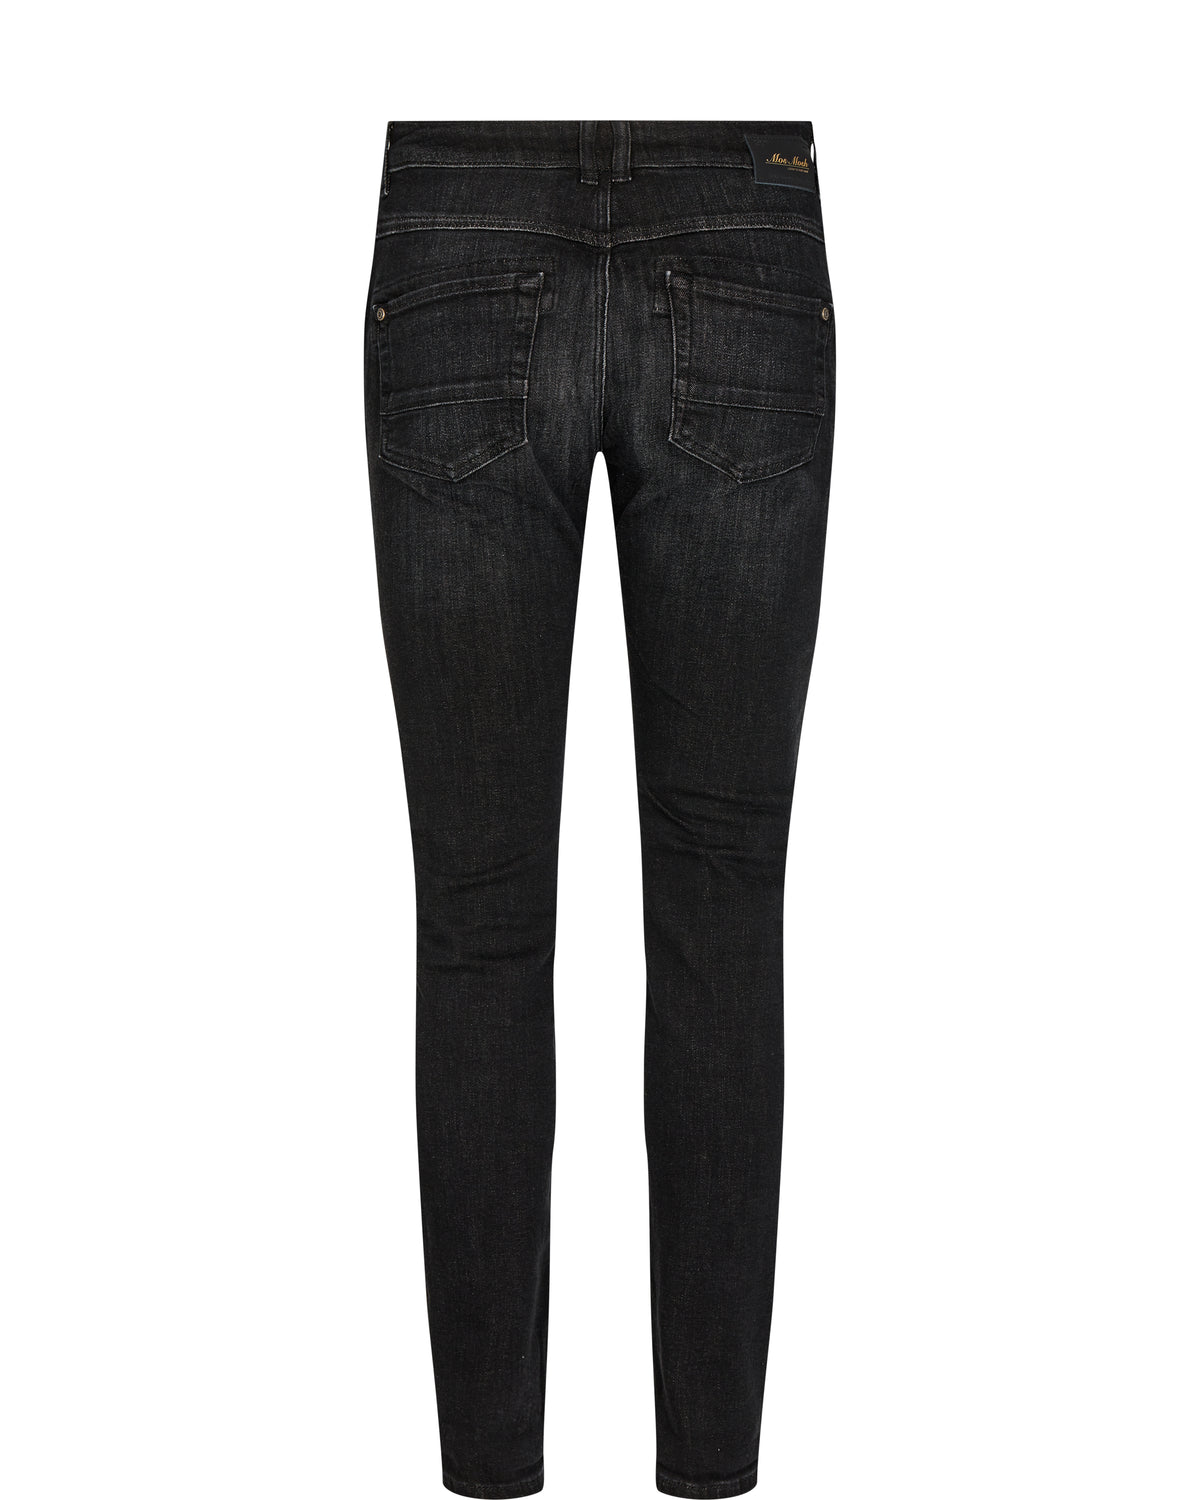 Slightly distressed black skinny jeans with metallic beaded details on pockets